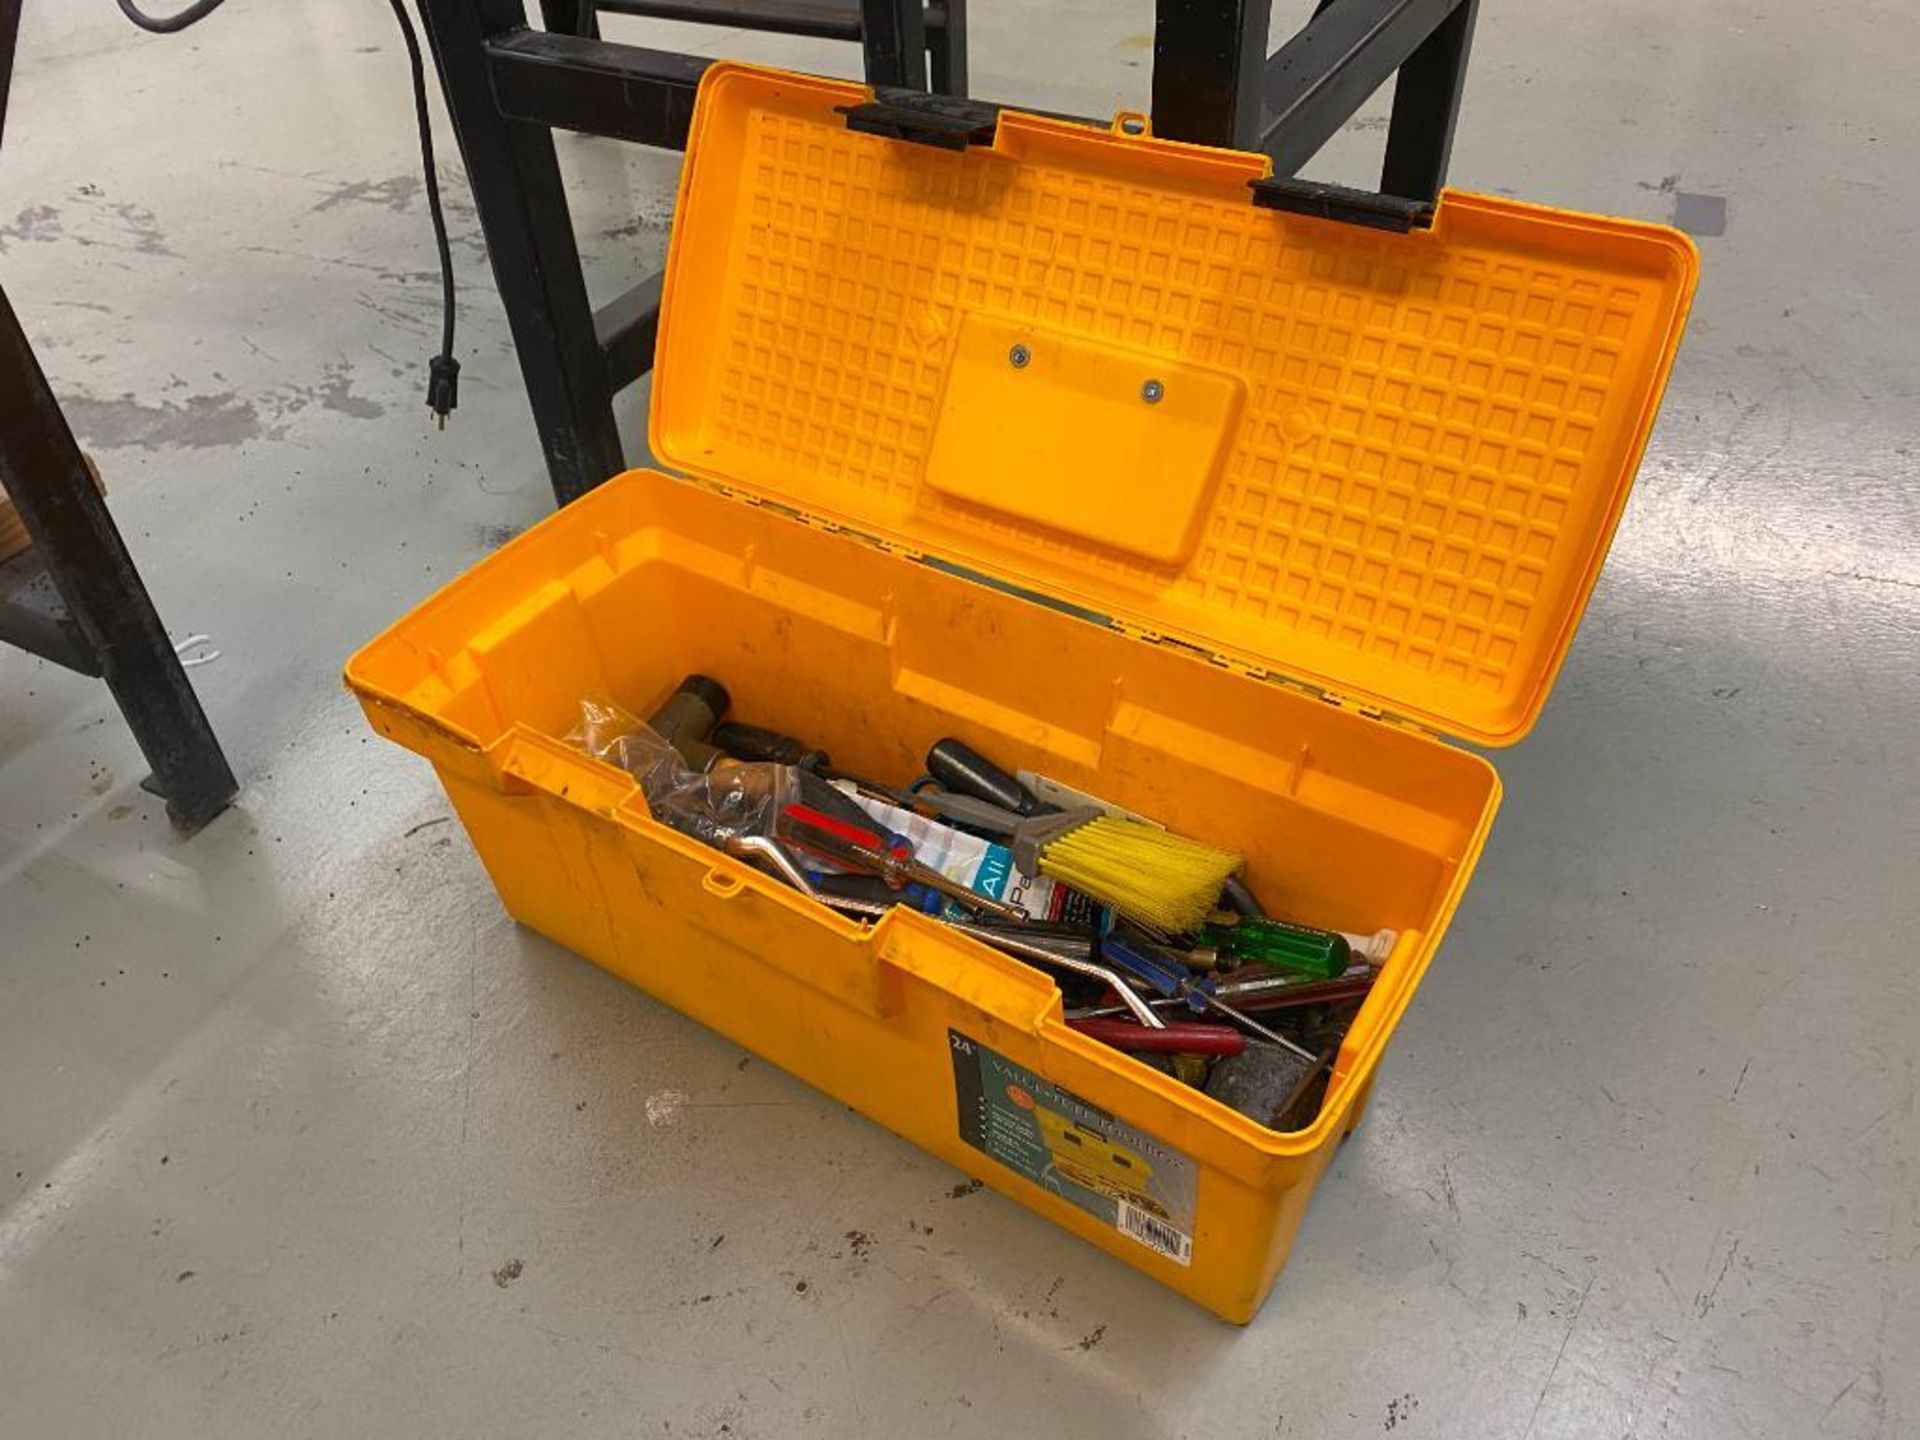 Toolbox w/ Assorted Hand Tools